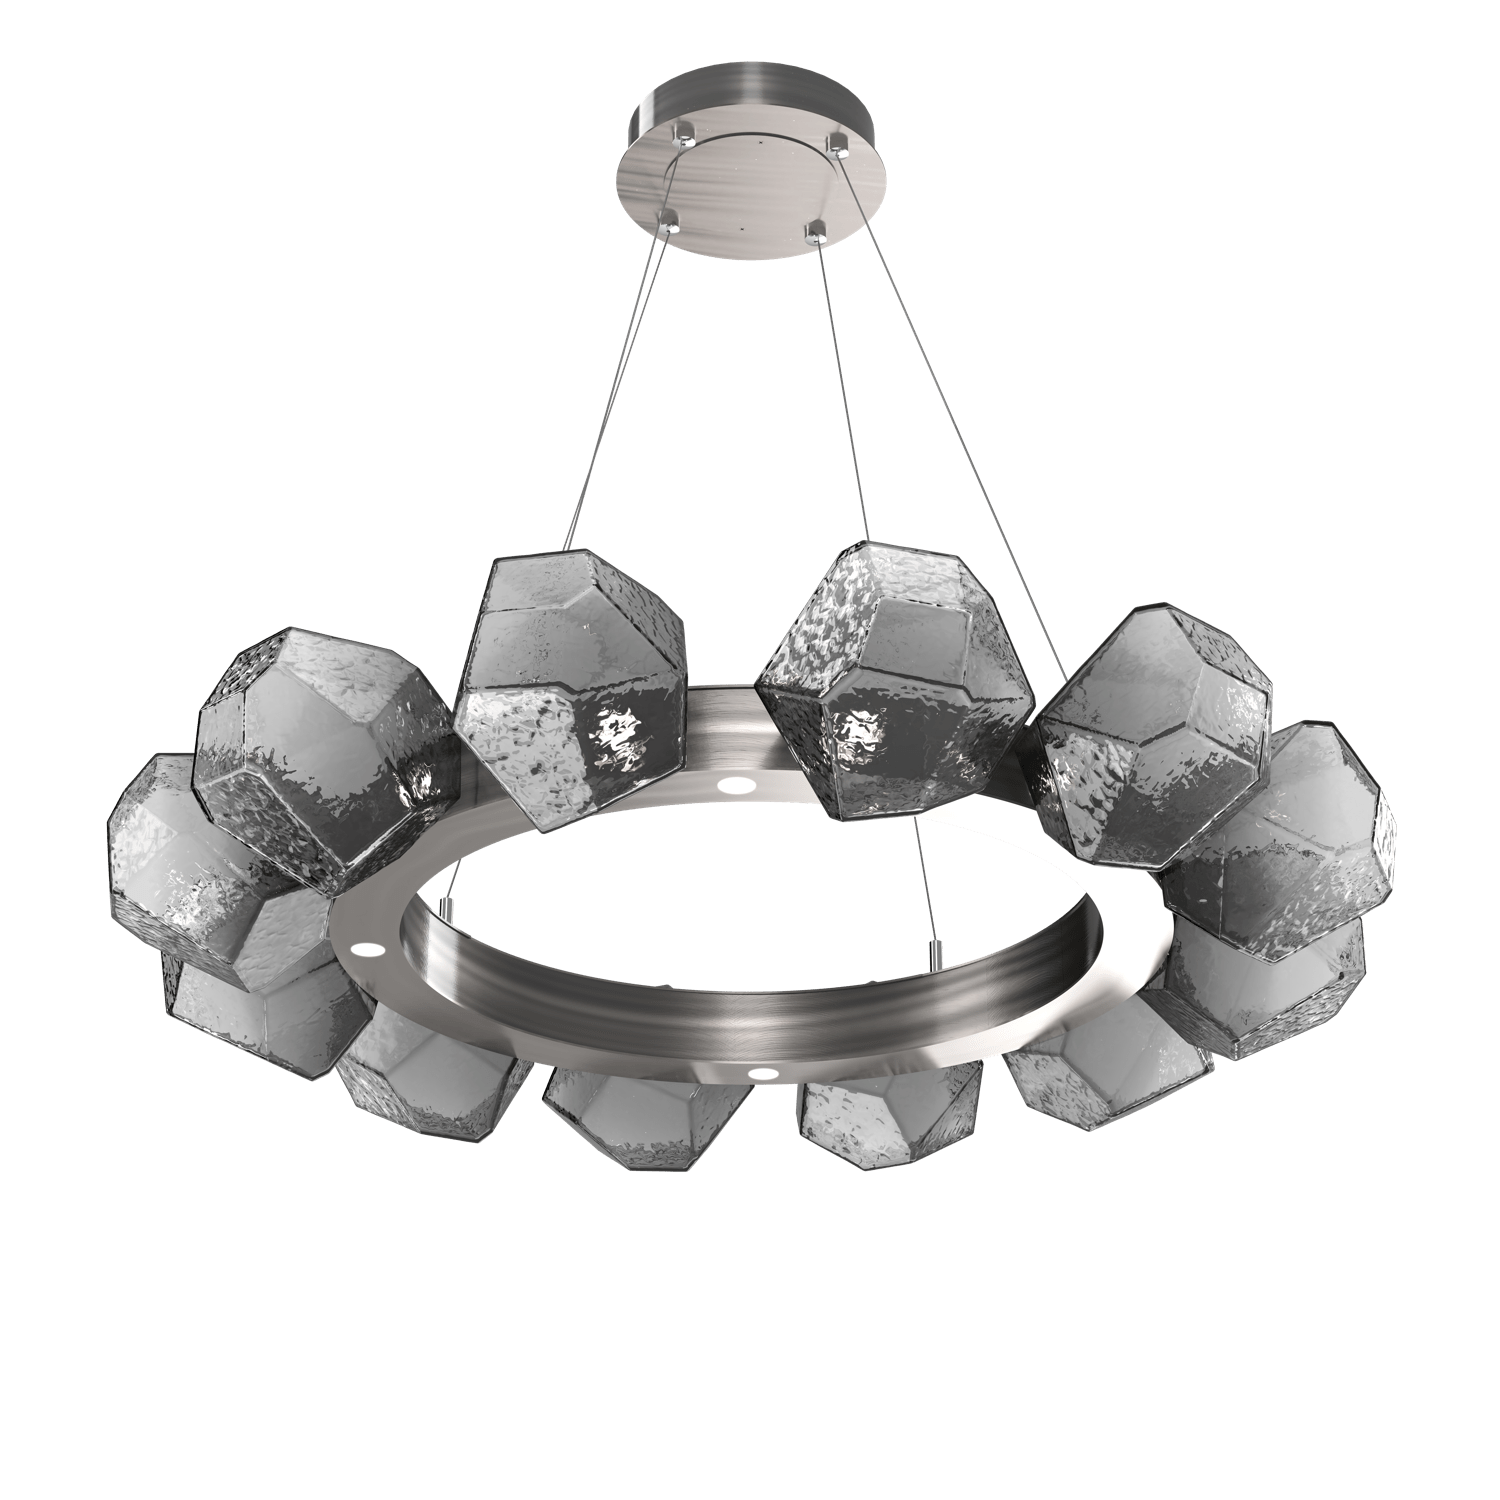 CHB0039-36-GM-S-Hammerton-Studio-Gem-36-inch-radial-ring-chandelier-with-gunmetal-finish-and-smoke-blown-glass-shades-and-LED-lamping